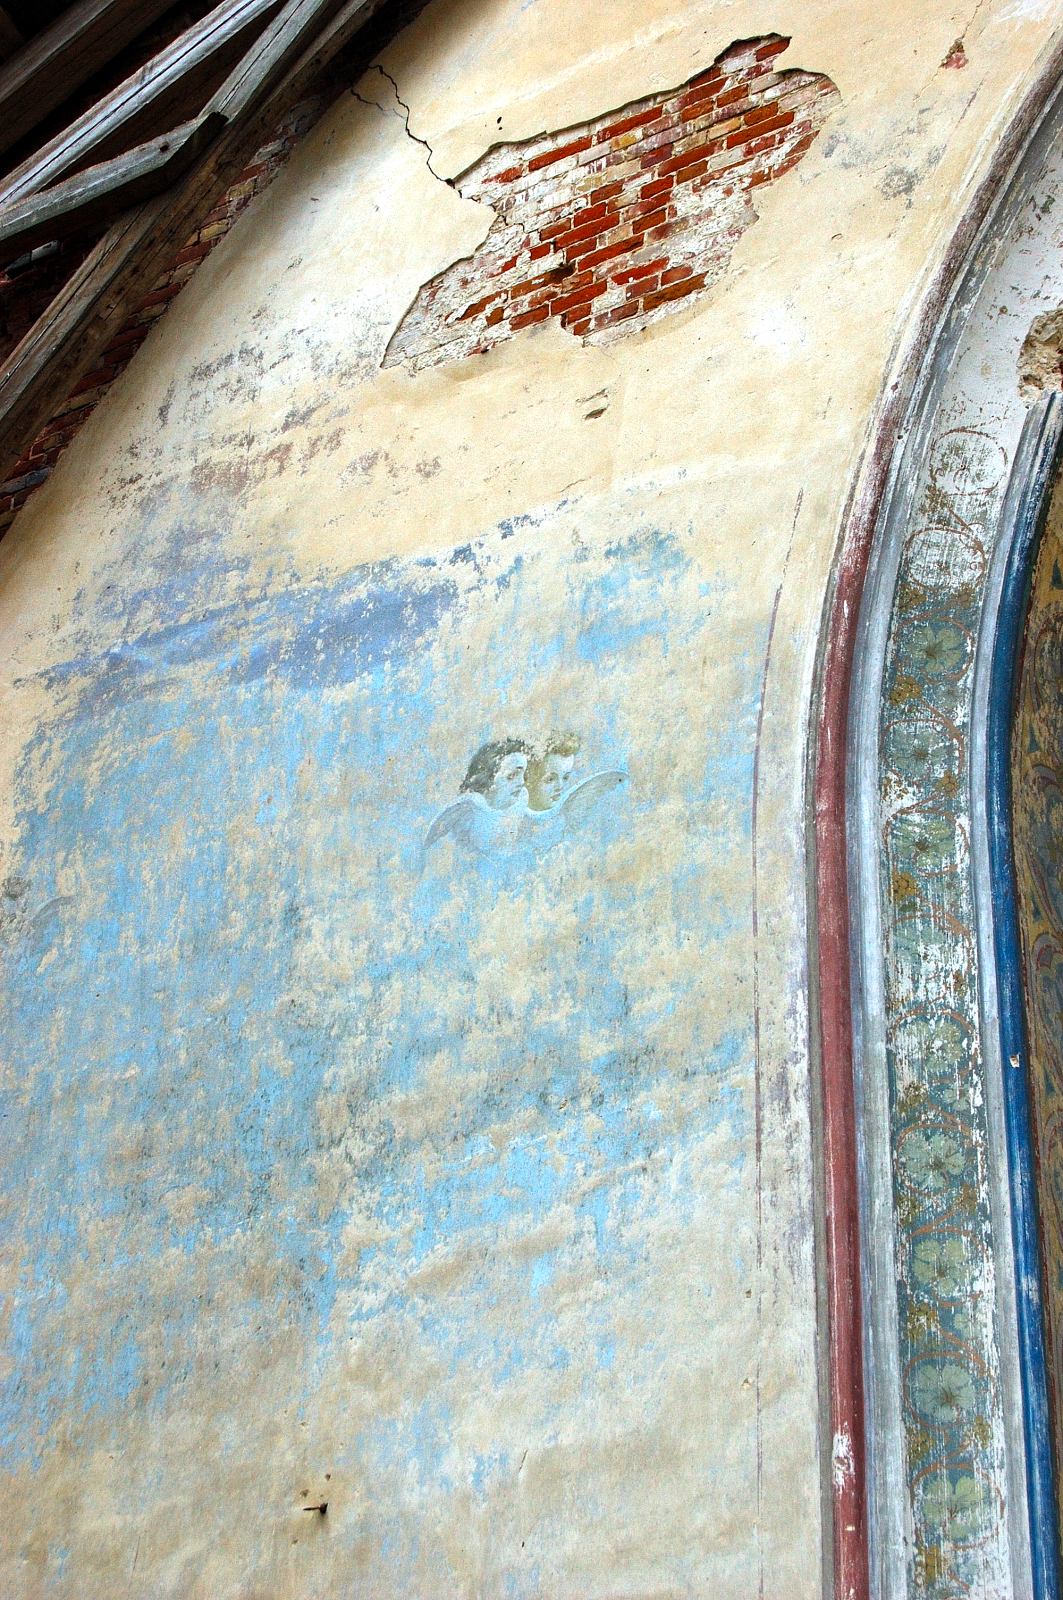 Remains of religious mural painted by Italian artists. St. Mary's Catholic Church Kamenka, Russia. Source: Steve Schreiber (2006).